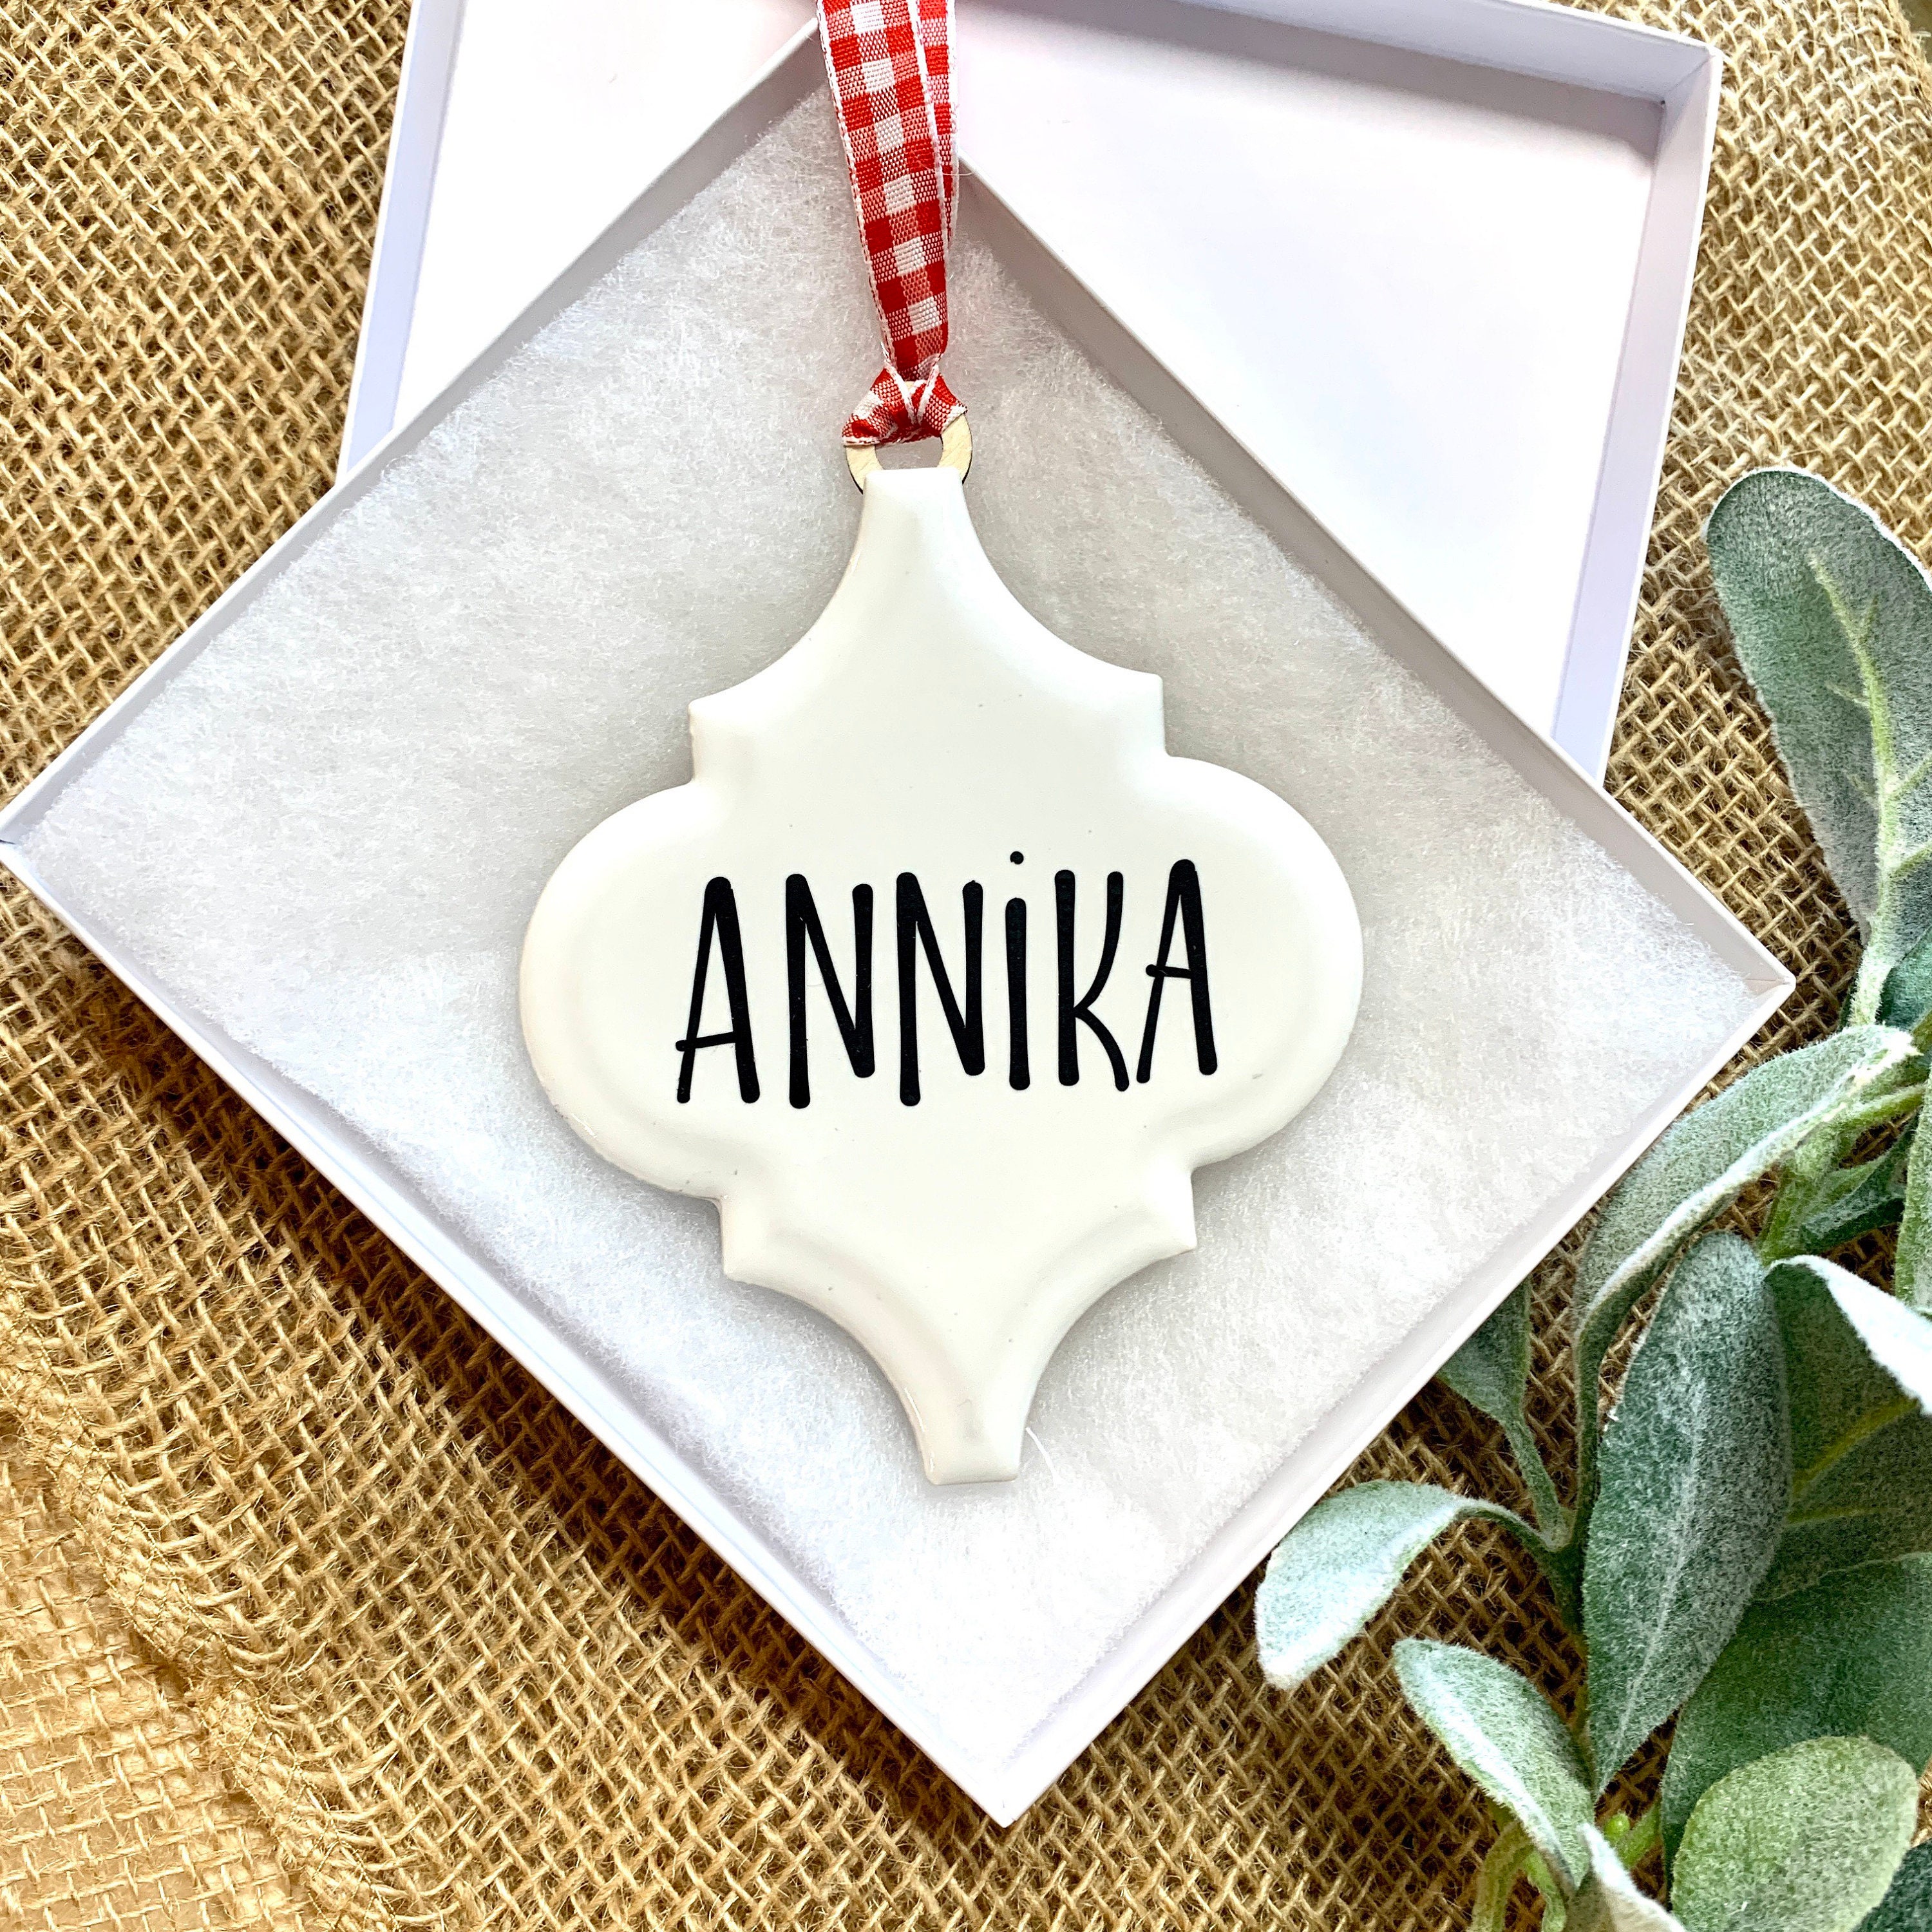 Air Dry Clay Kit, Cold Porcelain Self Hardening Clay for Name Tags